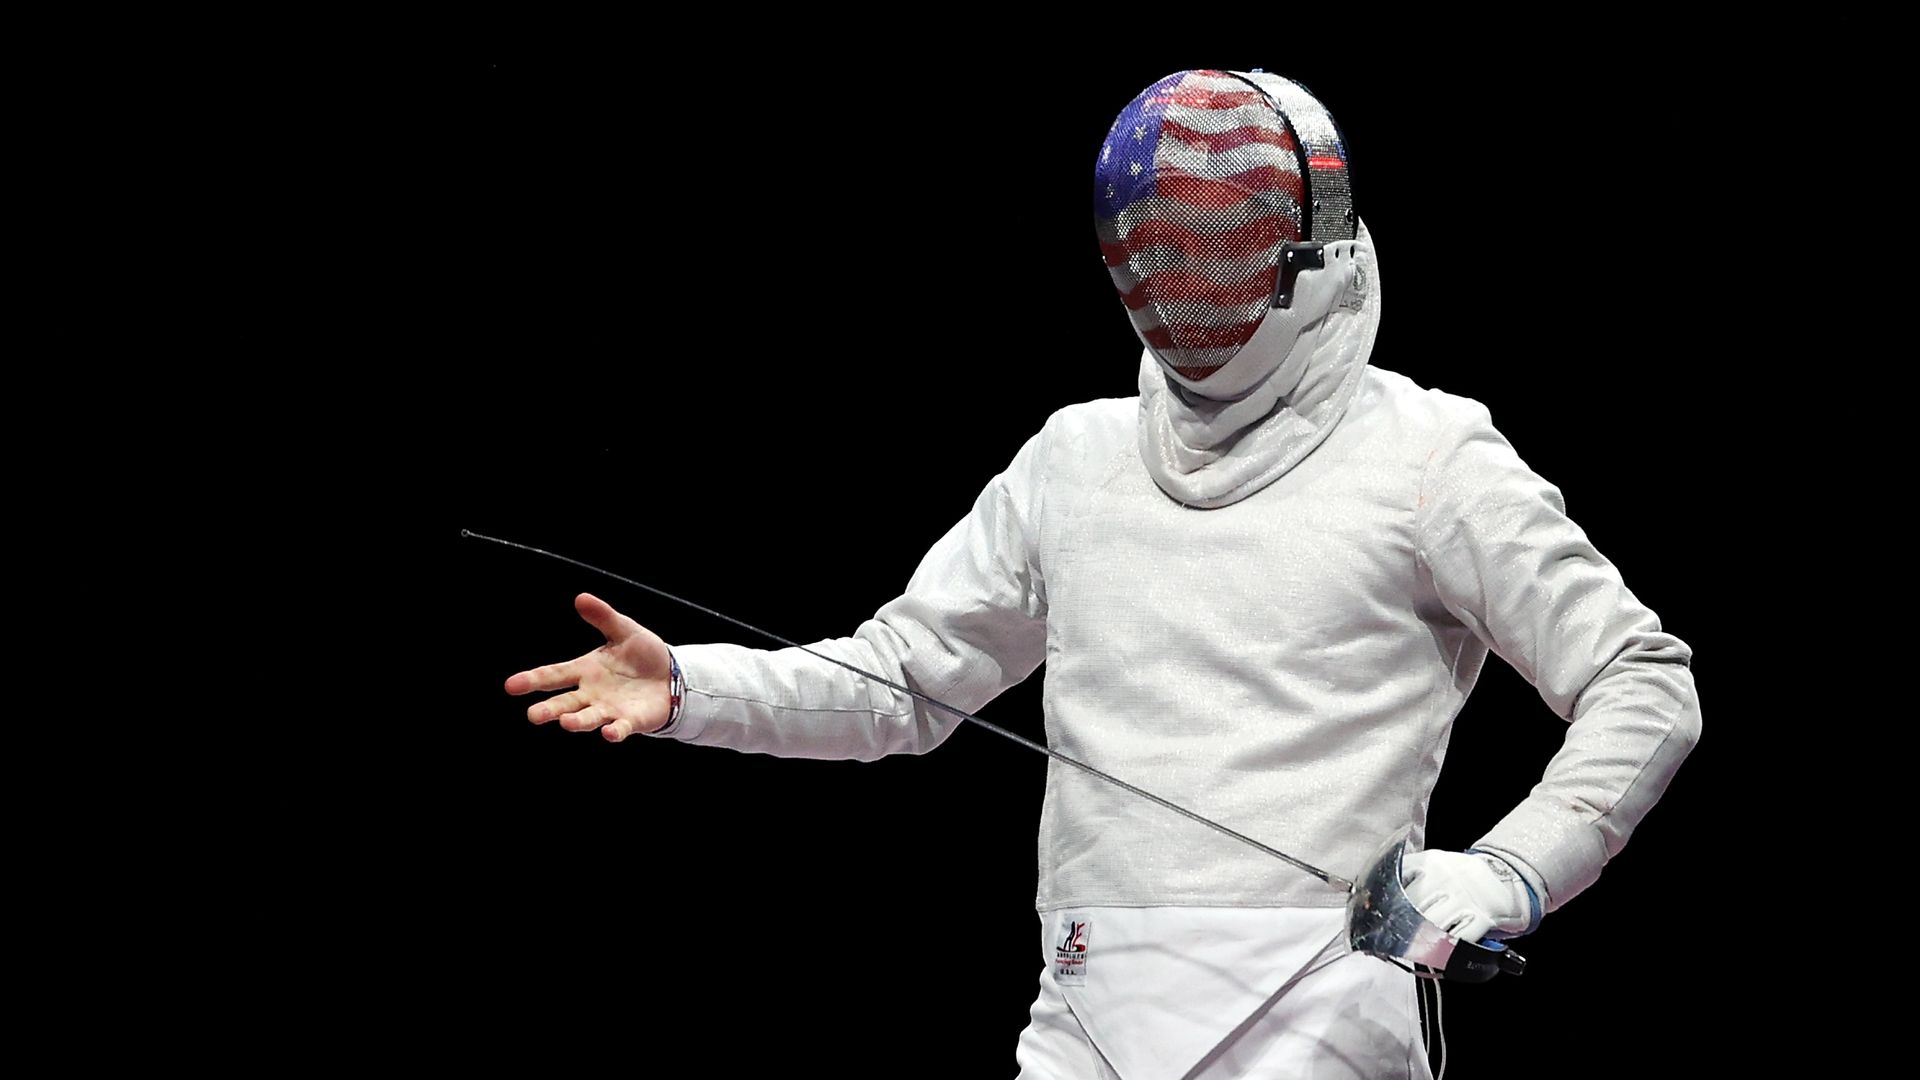  Eli Dershwitz of Team United States reacts in his men’s sabre individual bout against Junghwan Kim of Korea of the fencing on day one of the Tokyo 202